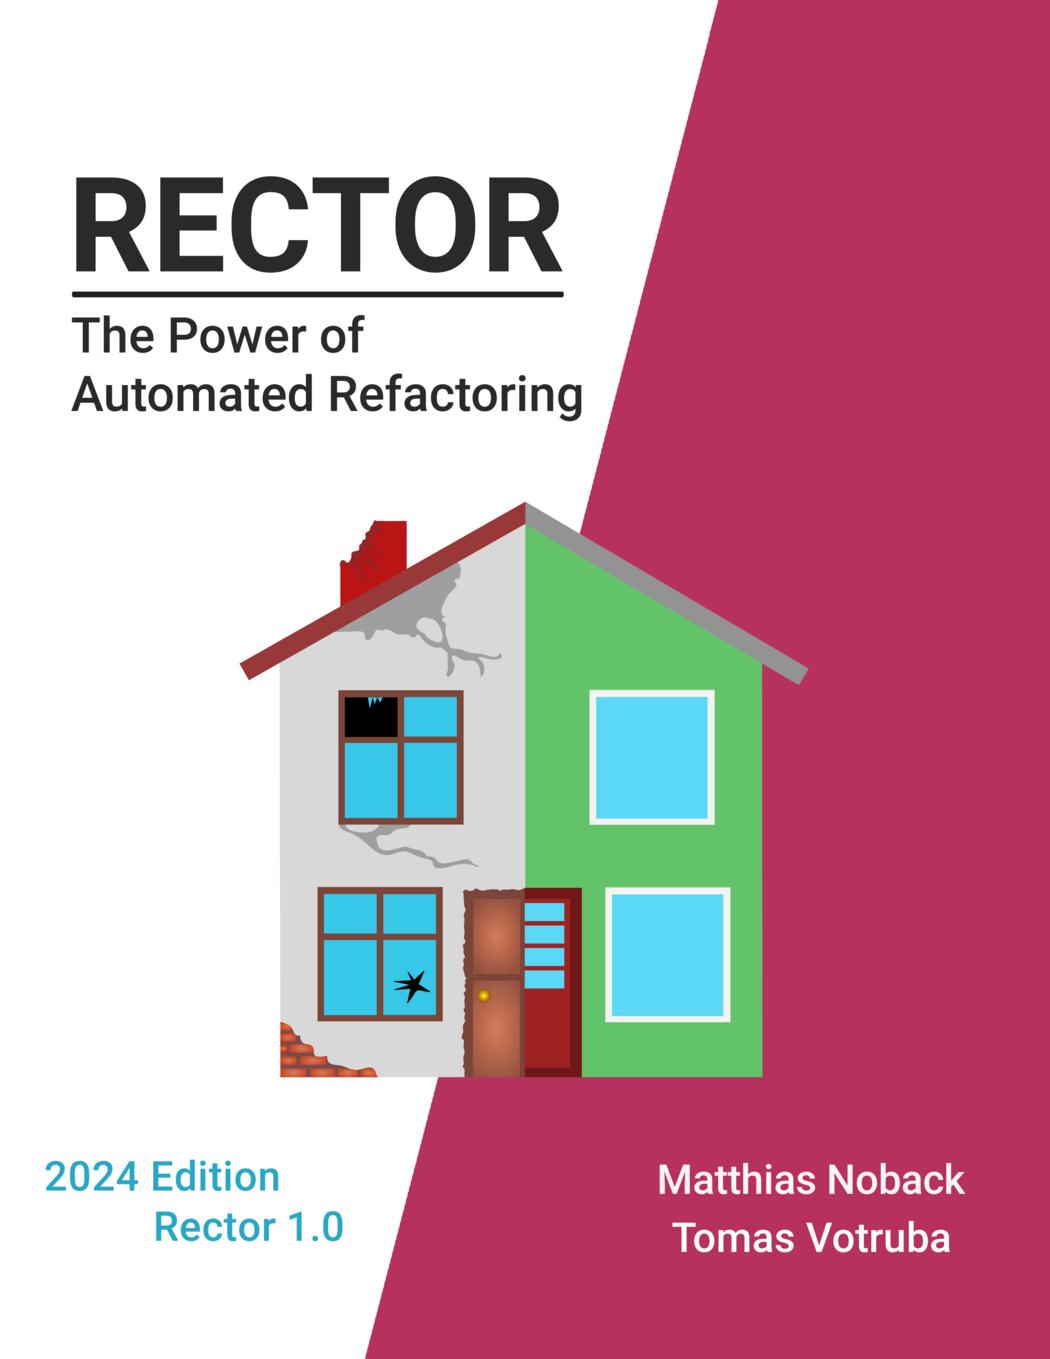 The cover of the 2024 Edition of the Rector book